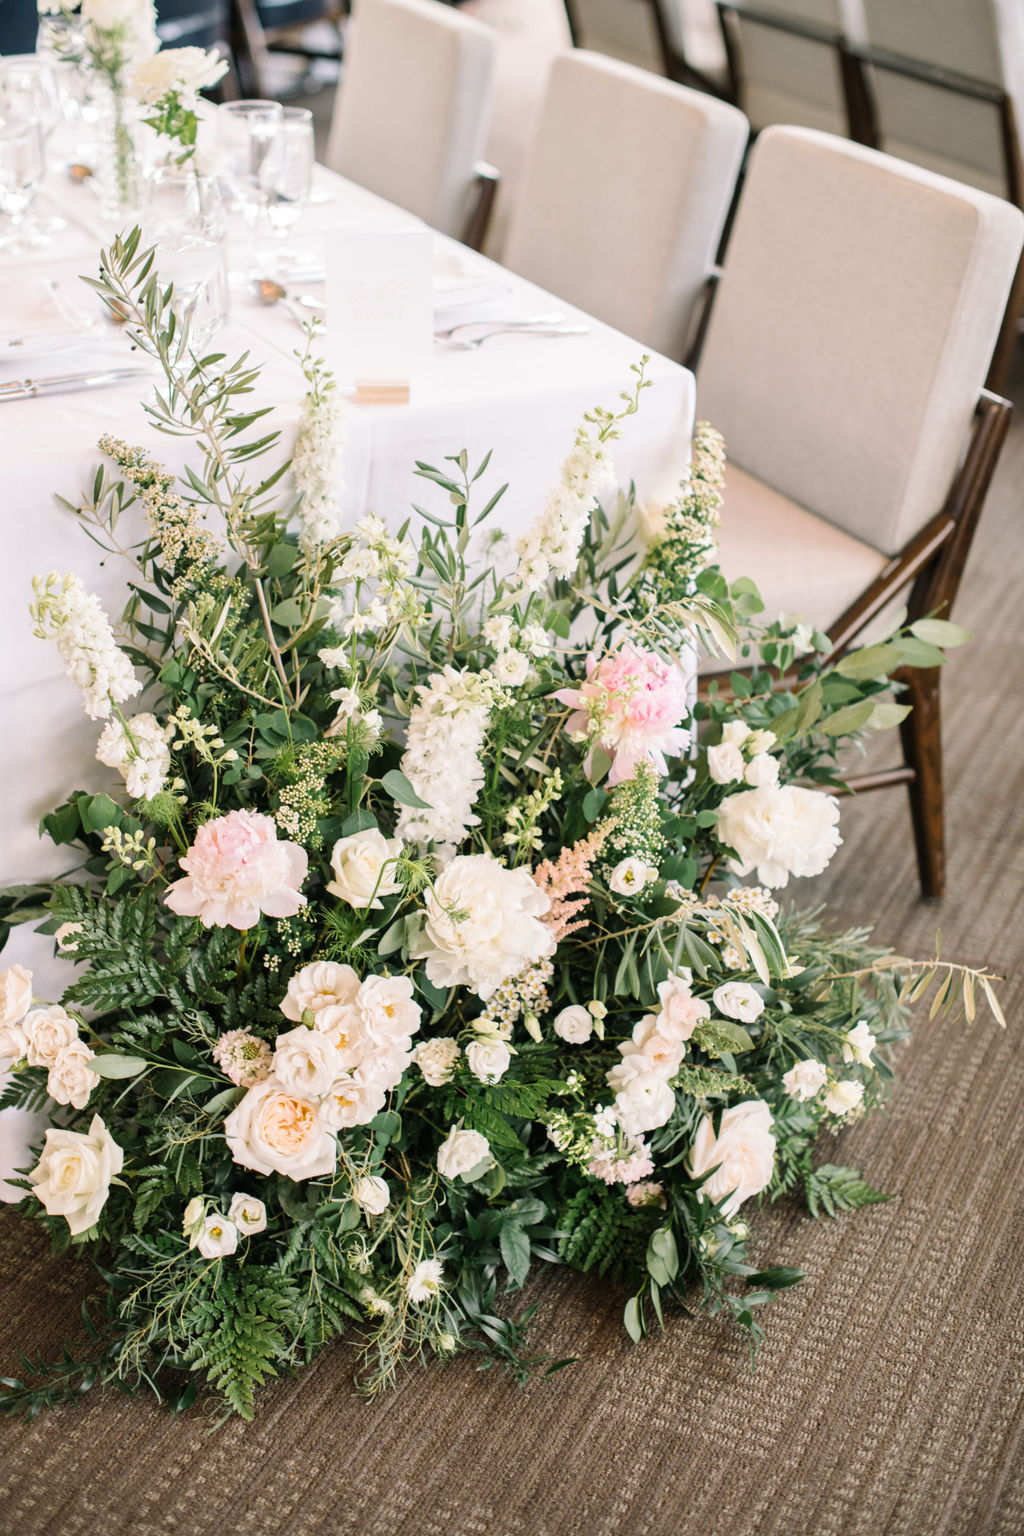 Classically styled Fairmont Banff Springs wedding reception, featuring white and pink wedding florals by Flowers by Janie.